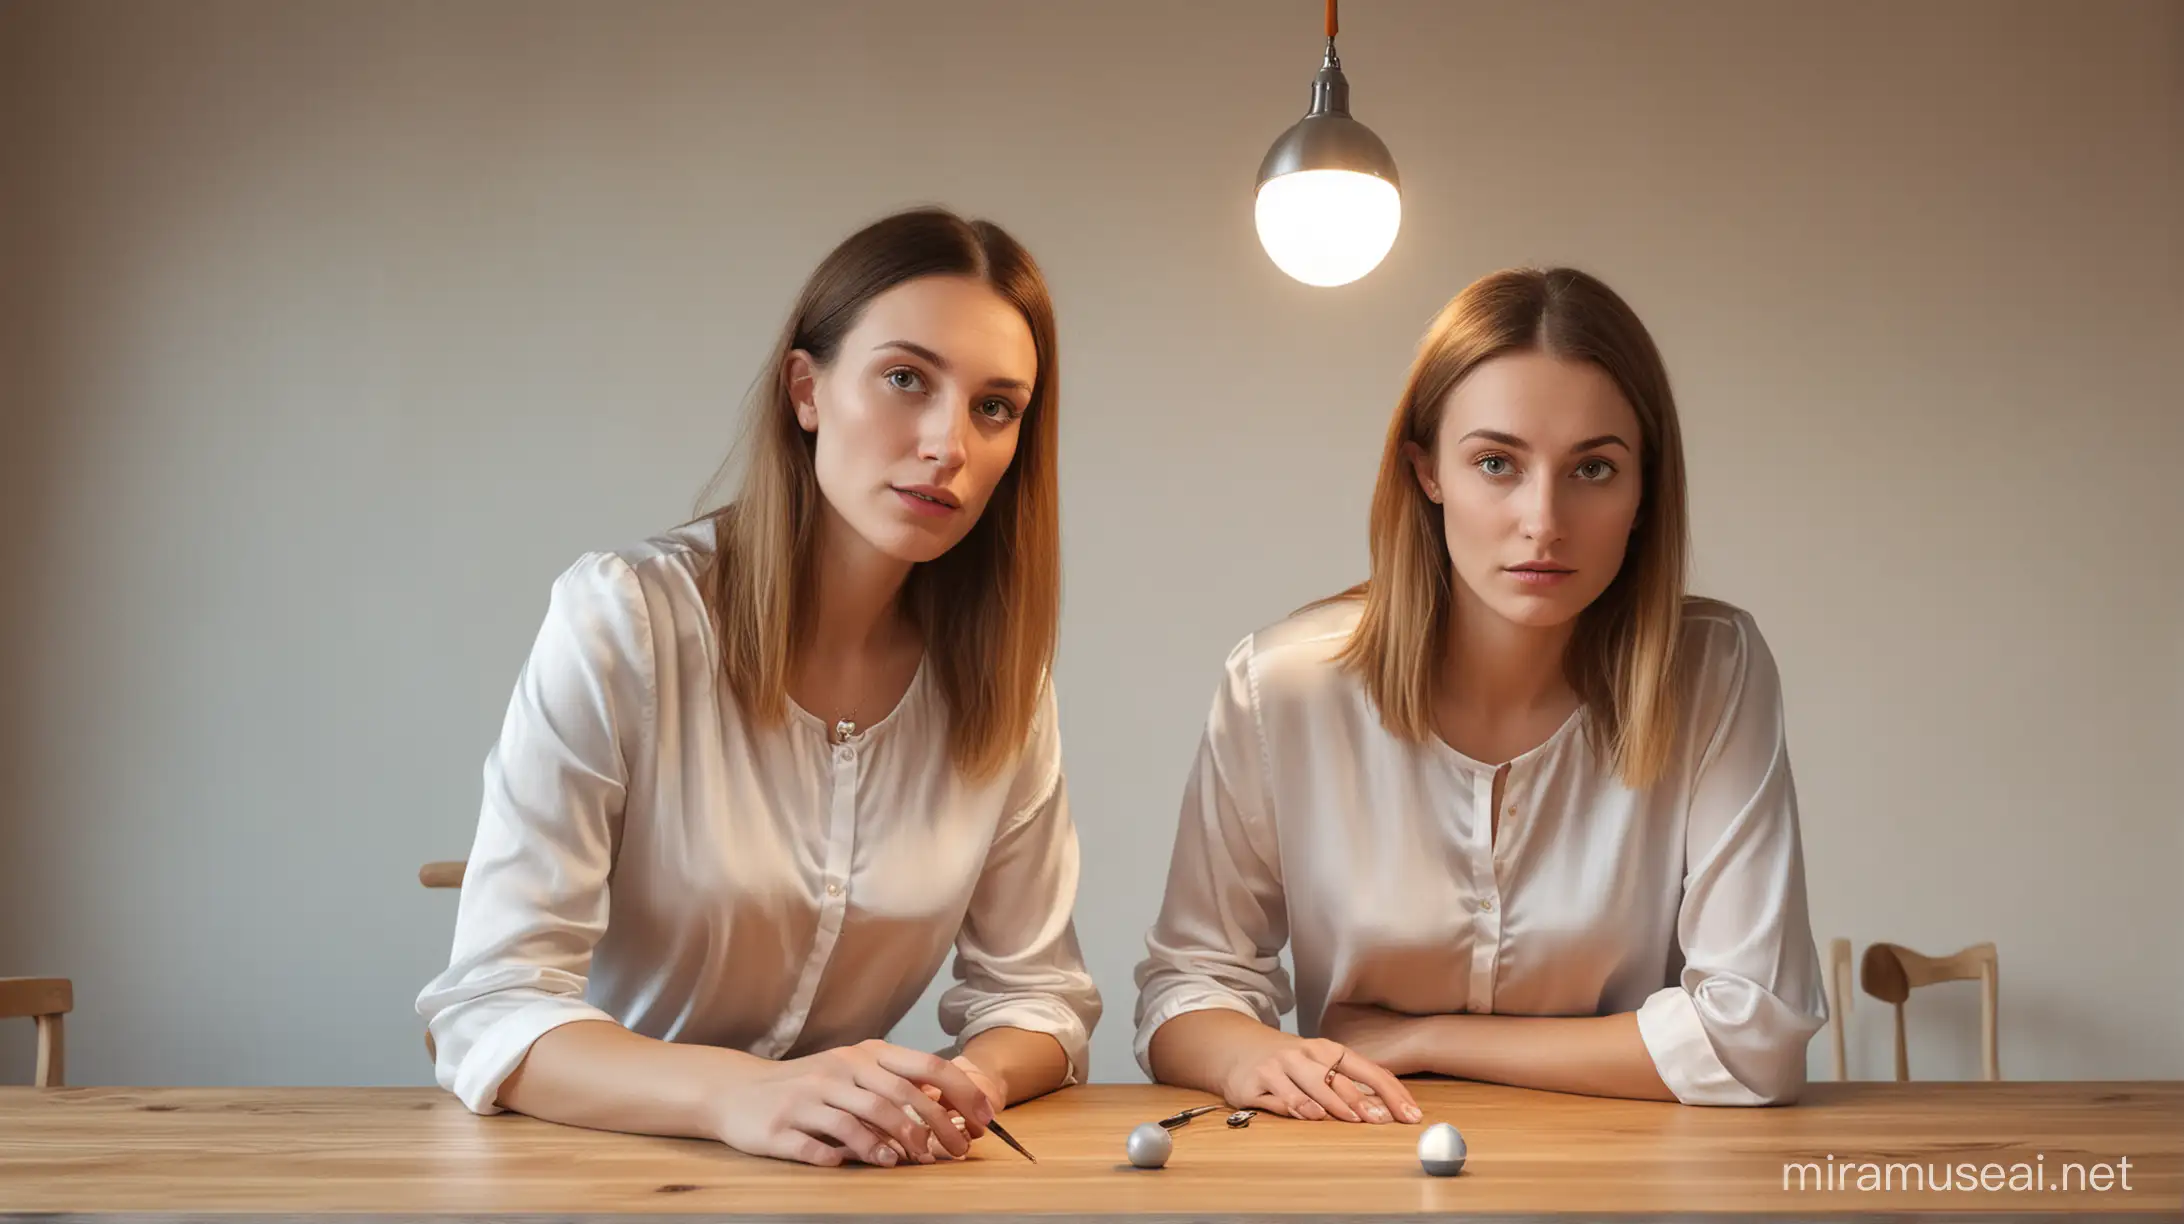 a realistic portrait of two women, big nose, looking like they have a cold, wearing silk contemporary tops, working at a round light wooden table, busy with the pendulum effect